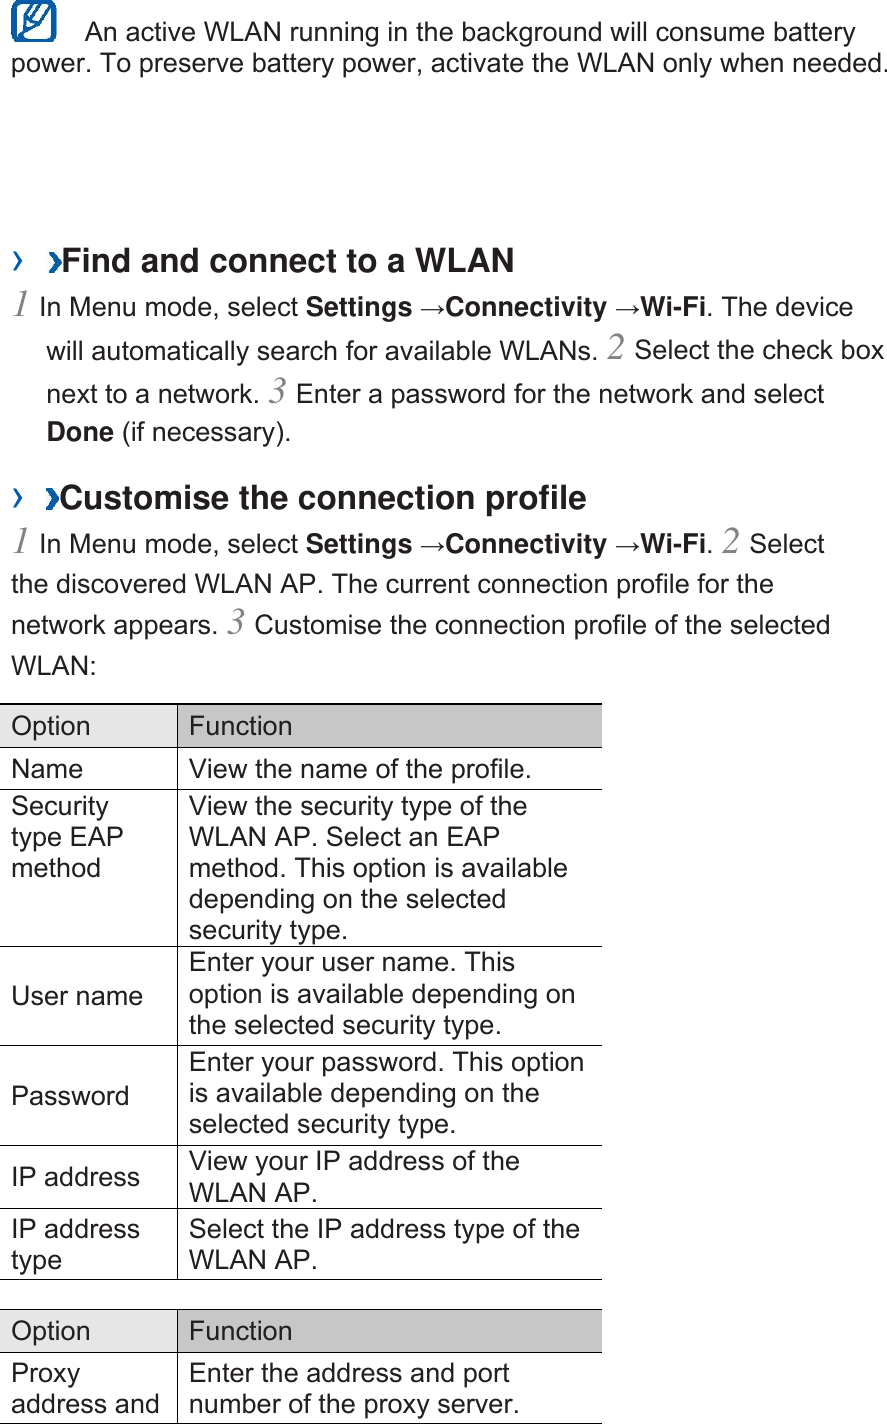   An active WLAN running in the background will consume battery power. To preserve battery power, activate the WLAN only when needed.   ›  Find and connect to a WLAN   1 In Menu mode, select Settings →Connectivity →Wi-Fi. The device will automatically search for available WLANs. 2 Select the check box next to a network. 3 Enter a password for the network and select Done (if necessary).   ›  Customise the connection profile   1 In Menu mode, select Settings →Connectivity →Wi-Fi. 2 Select the discovered WLAN AP. The current connection profile for the network appears. 3 Customise the connection profile of the selected WLAN:  Option   Function  Name    View the name of the profile.   Security type EAP method  View the security type of the WLAN AP. Select an EAP method. This option is available depending on the selected security type.   User name   Enter your user name. This option is available depending on the selected security type.   Password  Enter your password. This option is available depending on the selected security type.   IP address    View your IP address of the WLAN AP.   IP address type  Select the IP address type of the WLAN AP.    Option   Function  Proxy address and Enter the address and port number of the proxy server.   